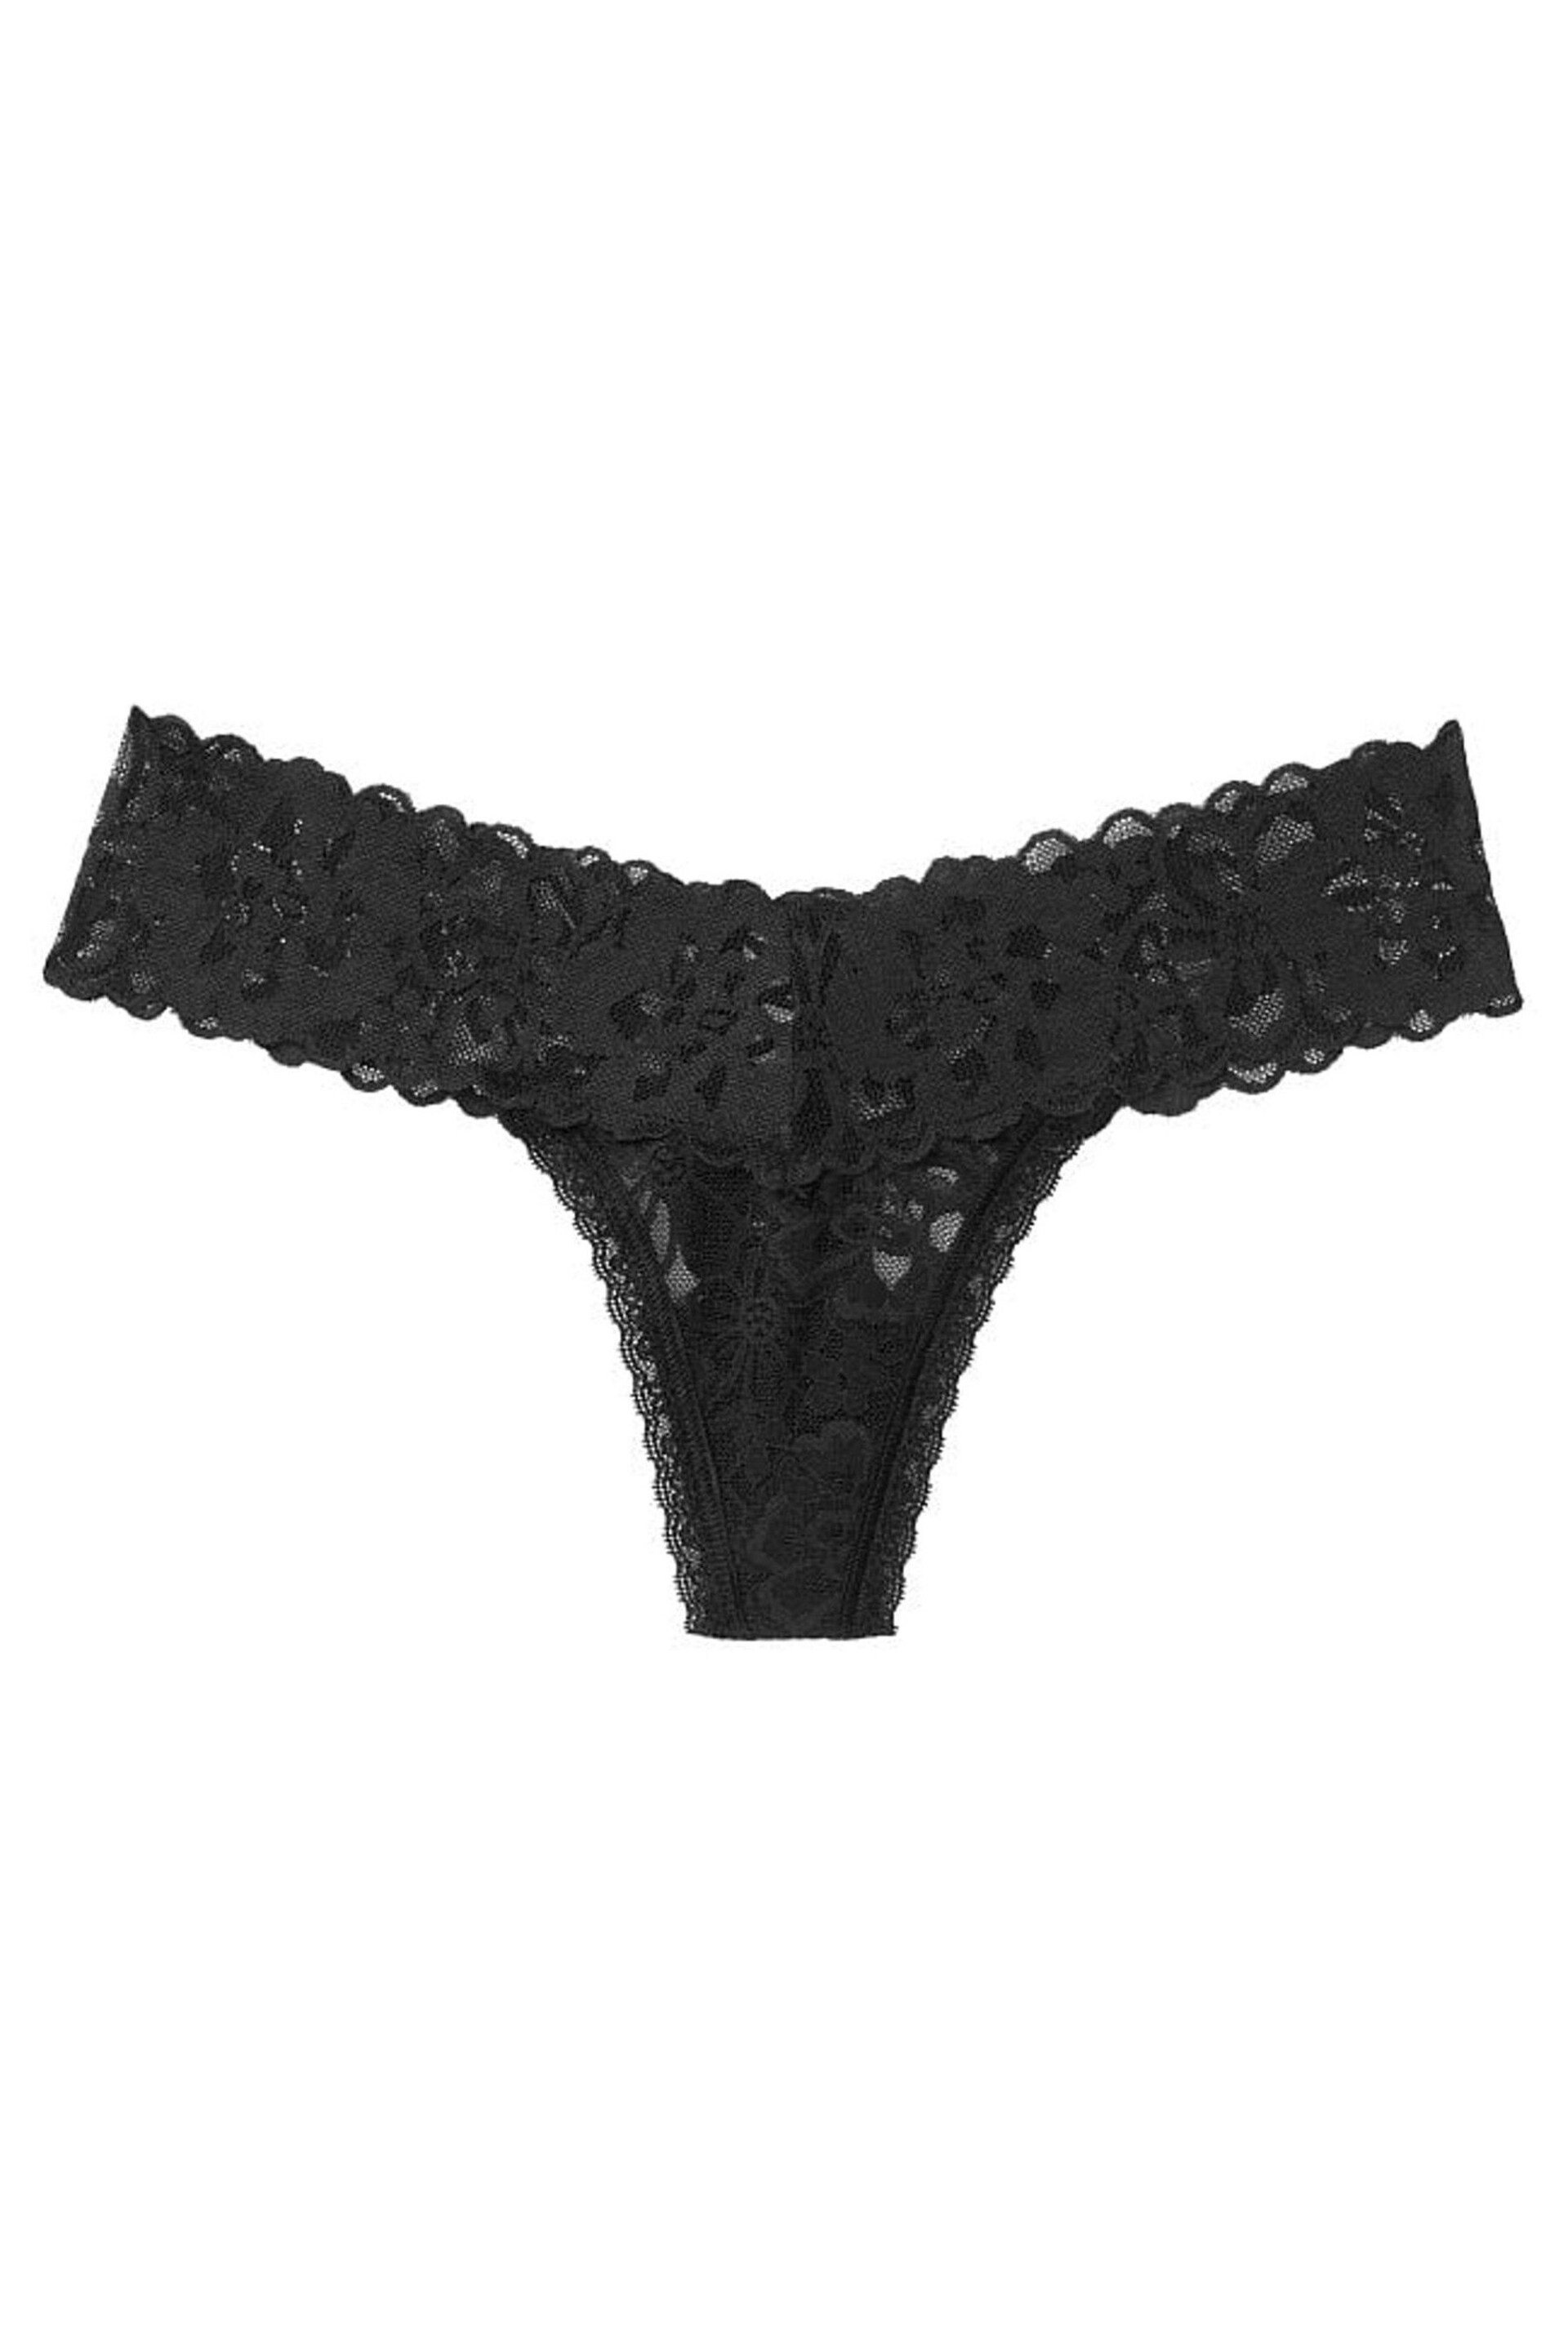 Victoria's Secret Black Lace Thong Knickers - Image 3 of 3